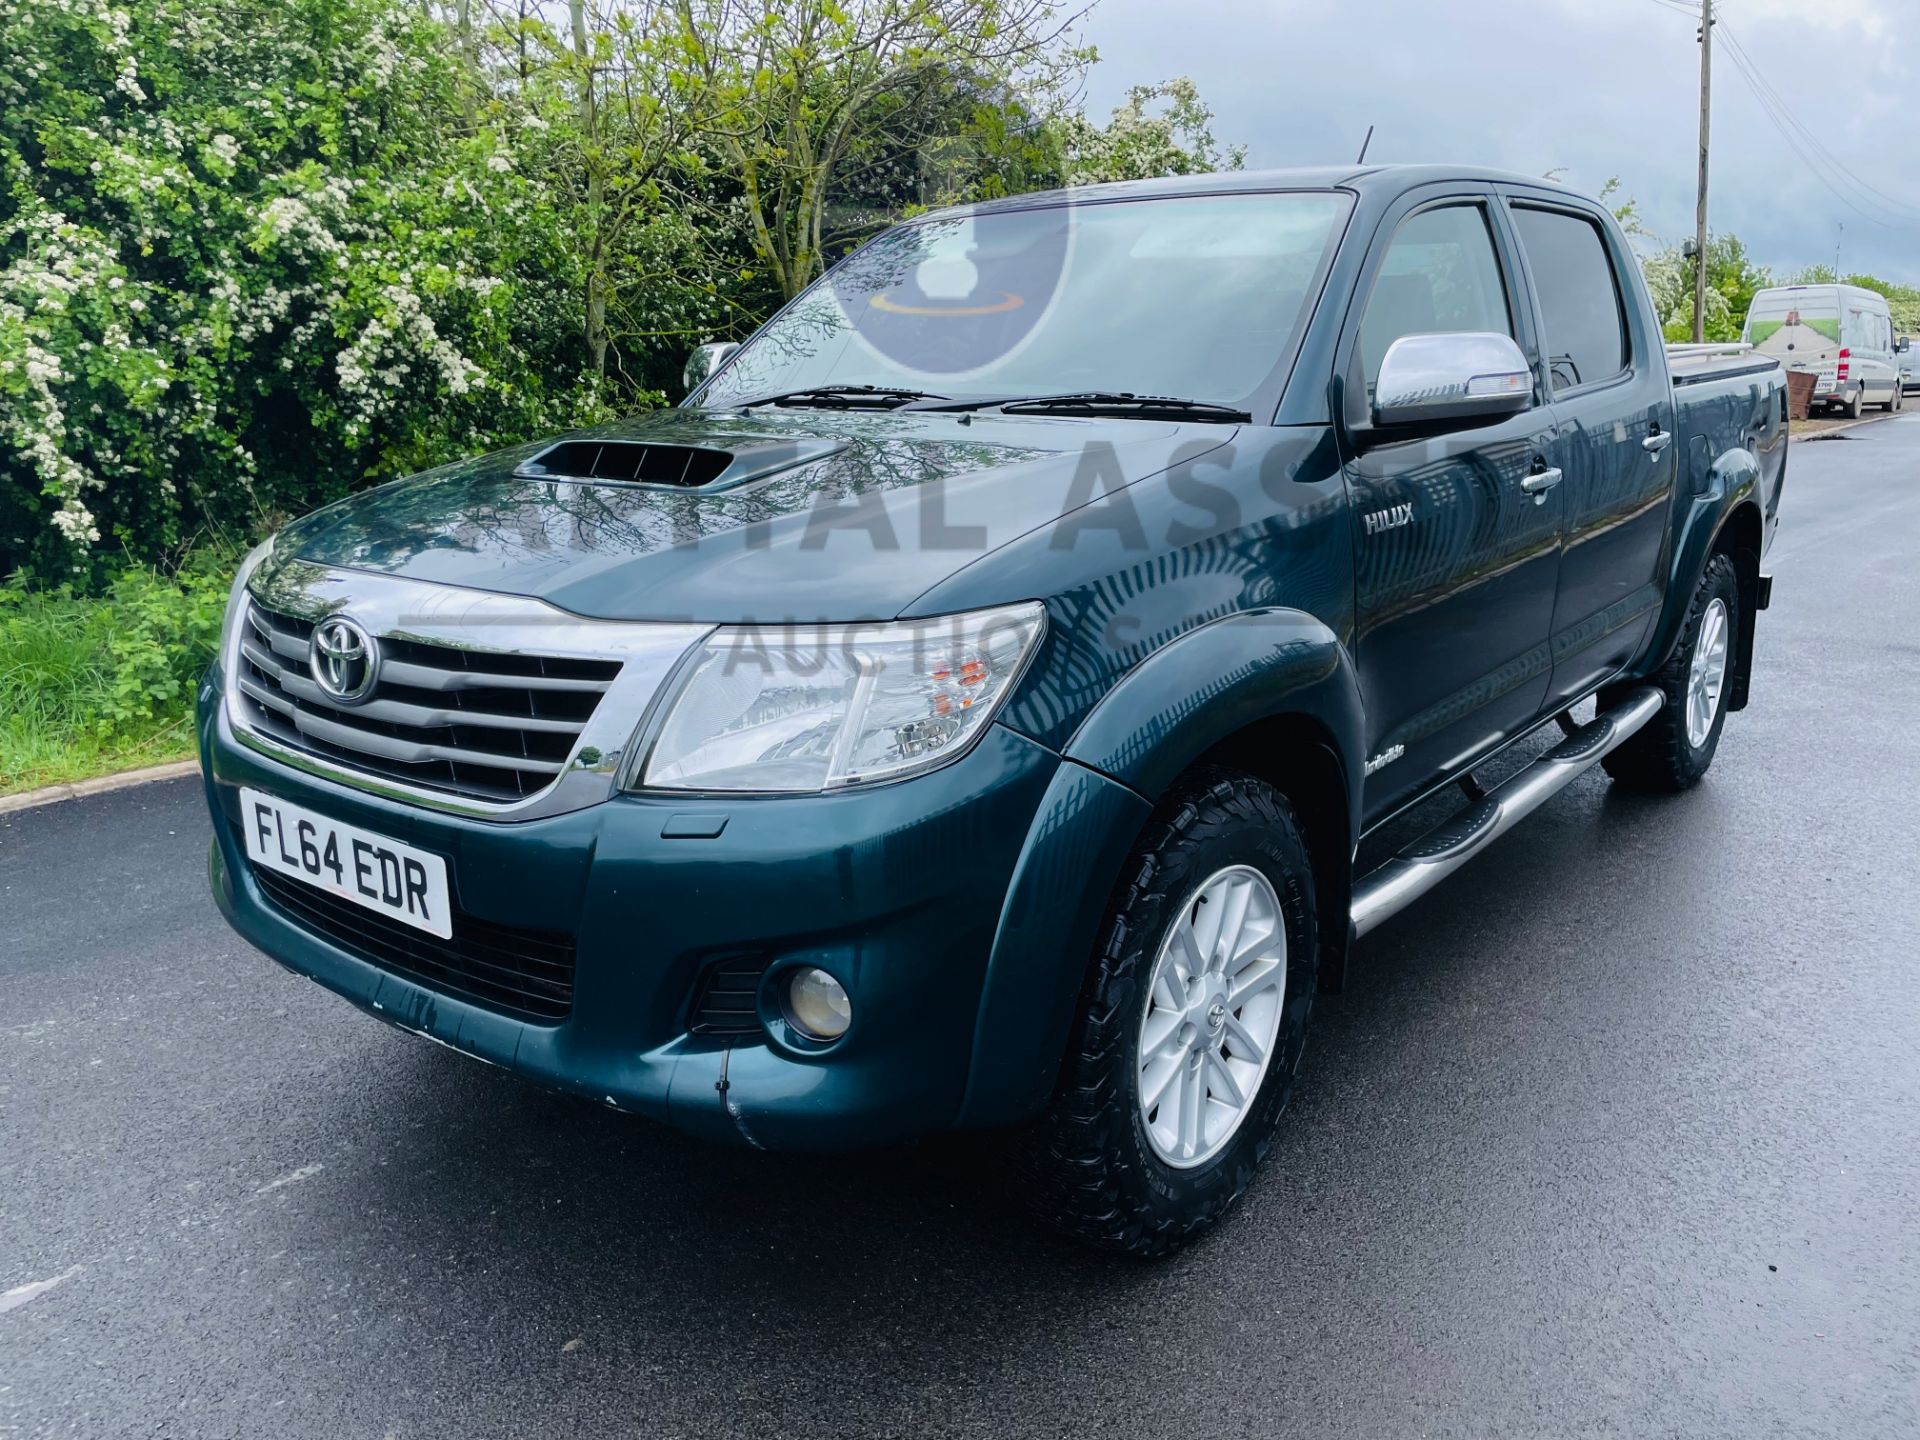 ON SALE TOYOTA HILUX 3.0 D-4D "INVINCIBLE" AUTO (2015 MODEL) TOP SPEC - LEATHER - REAR CAMERA - - Image 3 of 22